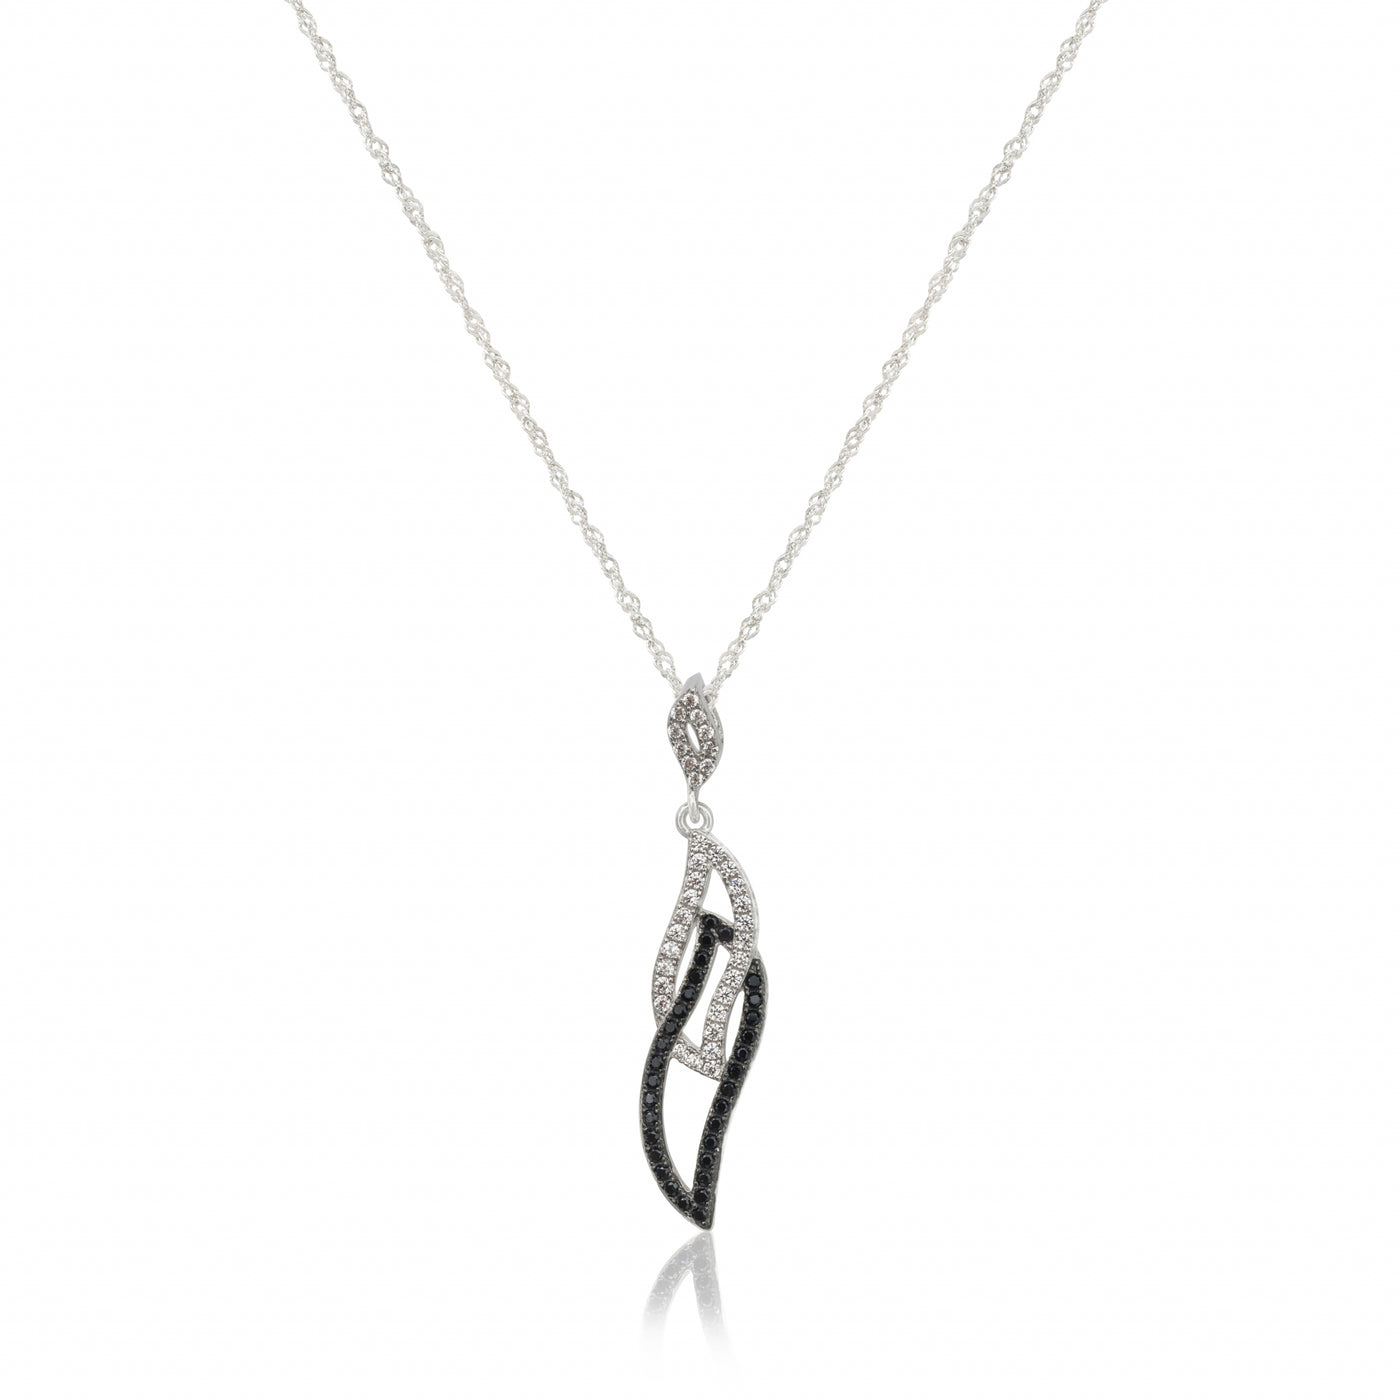 Pendulum Black and White Silver - Necklace